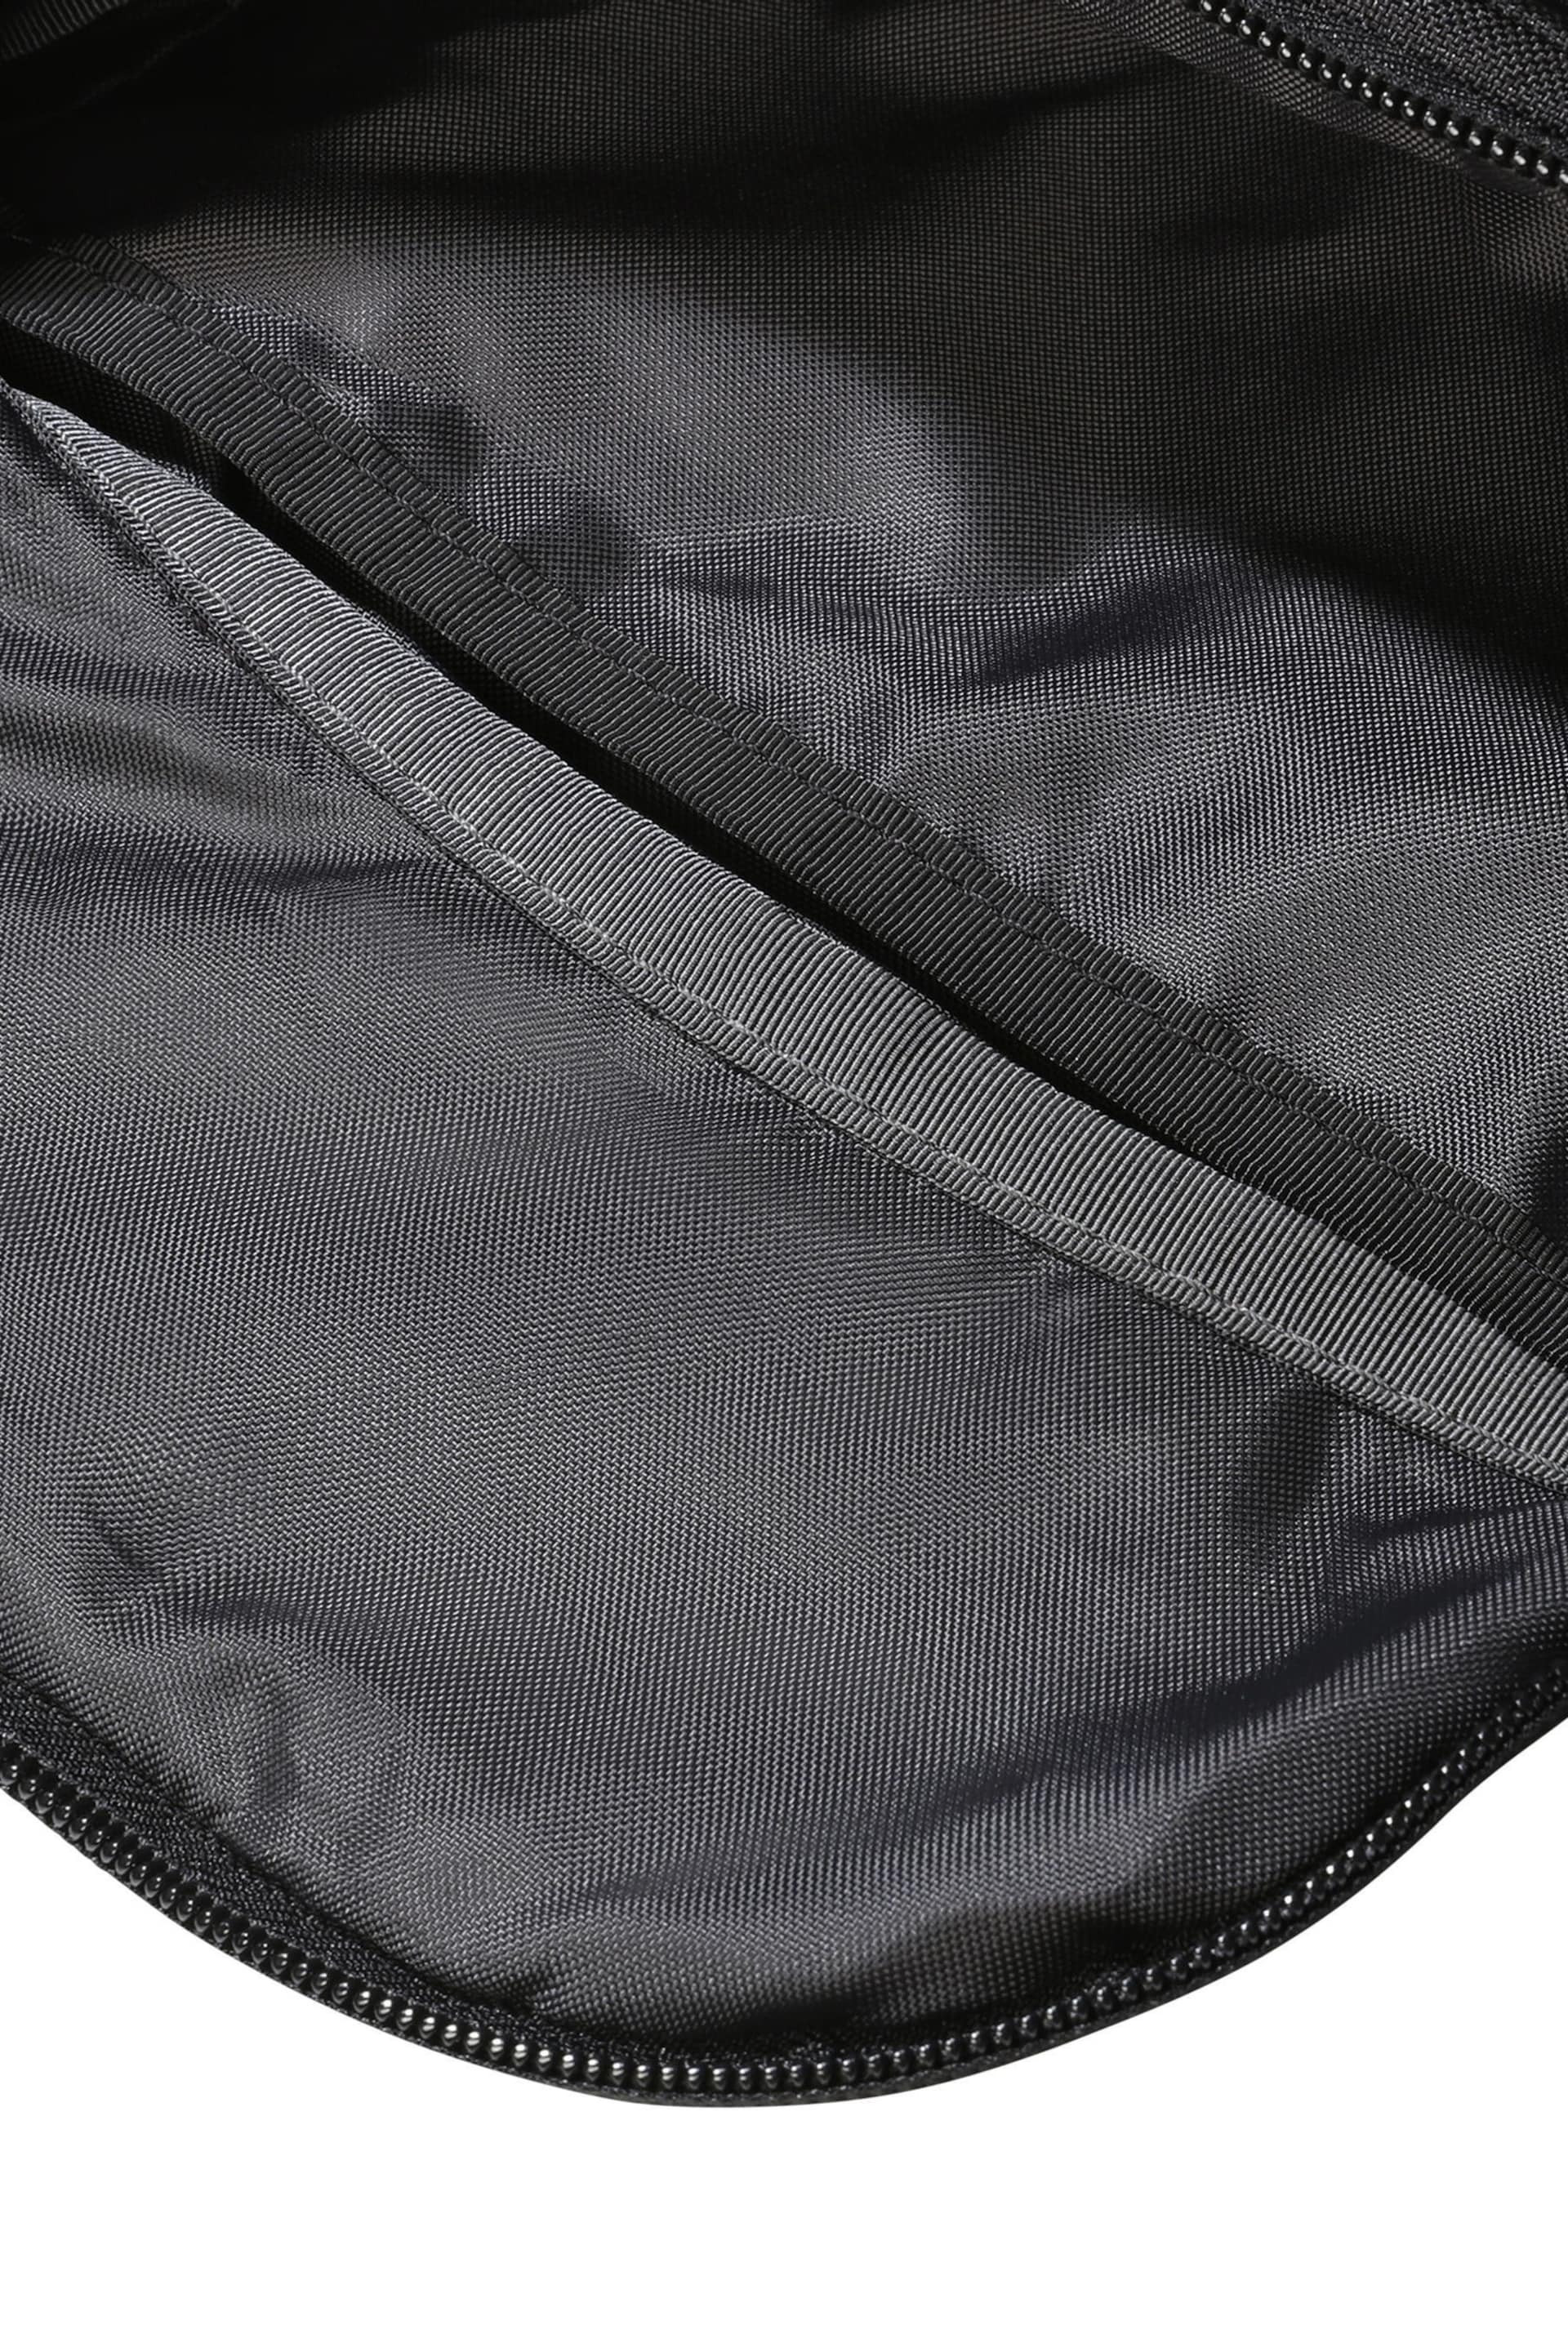 The North Face Black Jester Bum Bag - Image 4 of 4